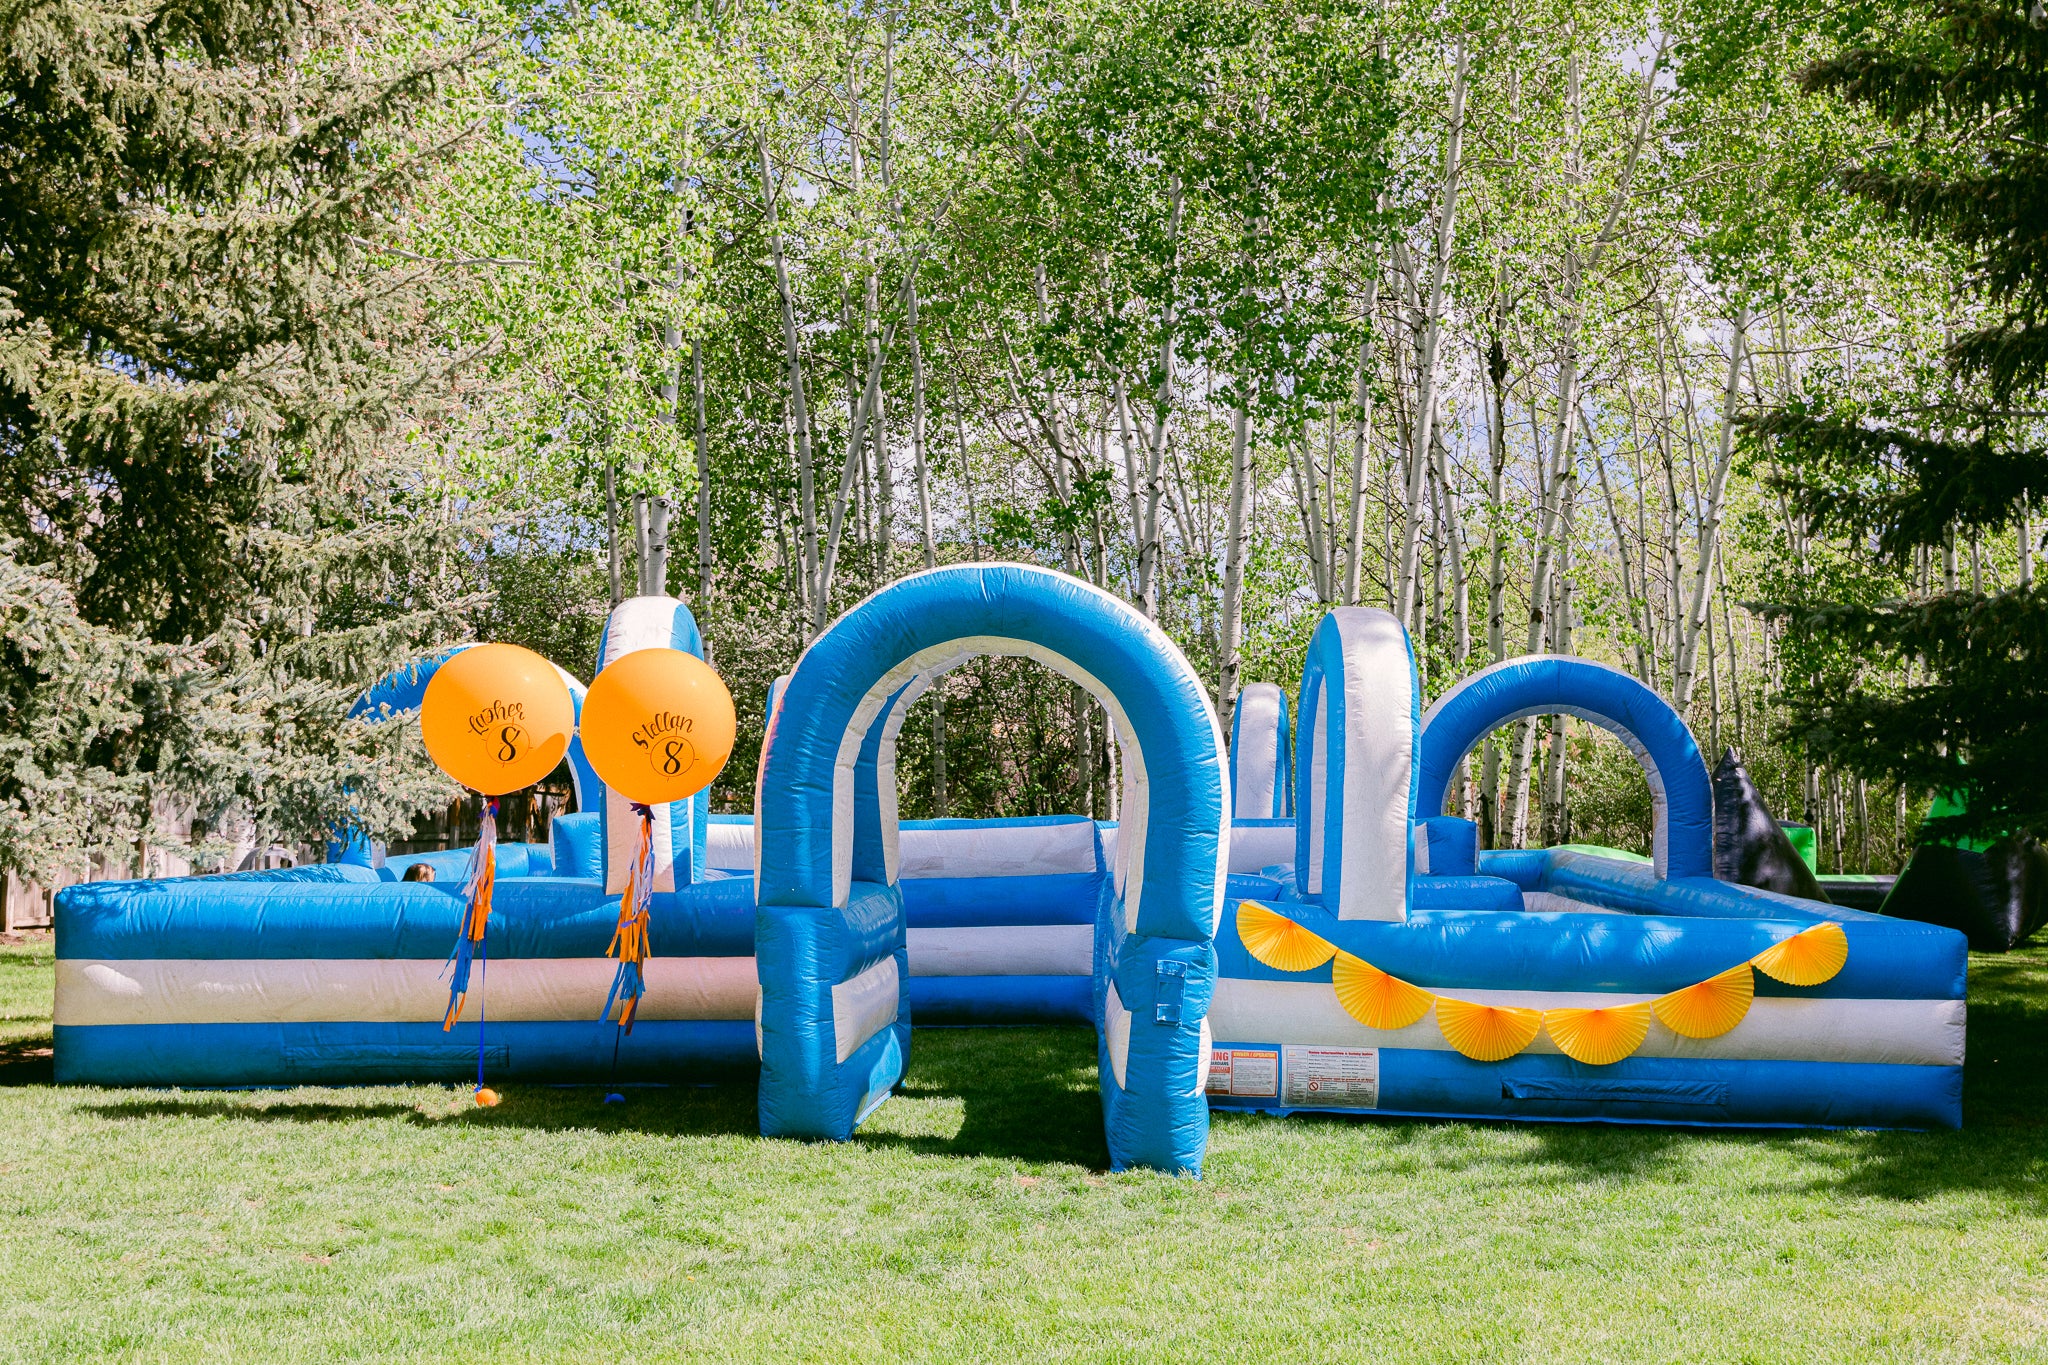 Inflatable obstacle course used for a Nerf-themed birthday party.